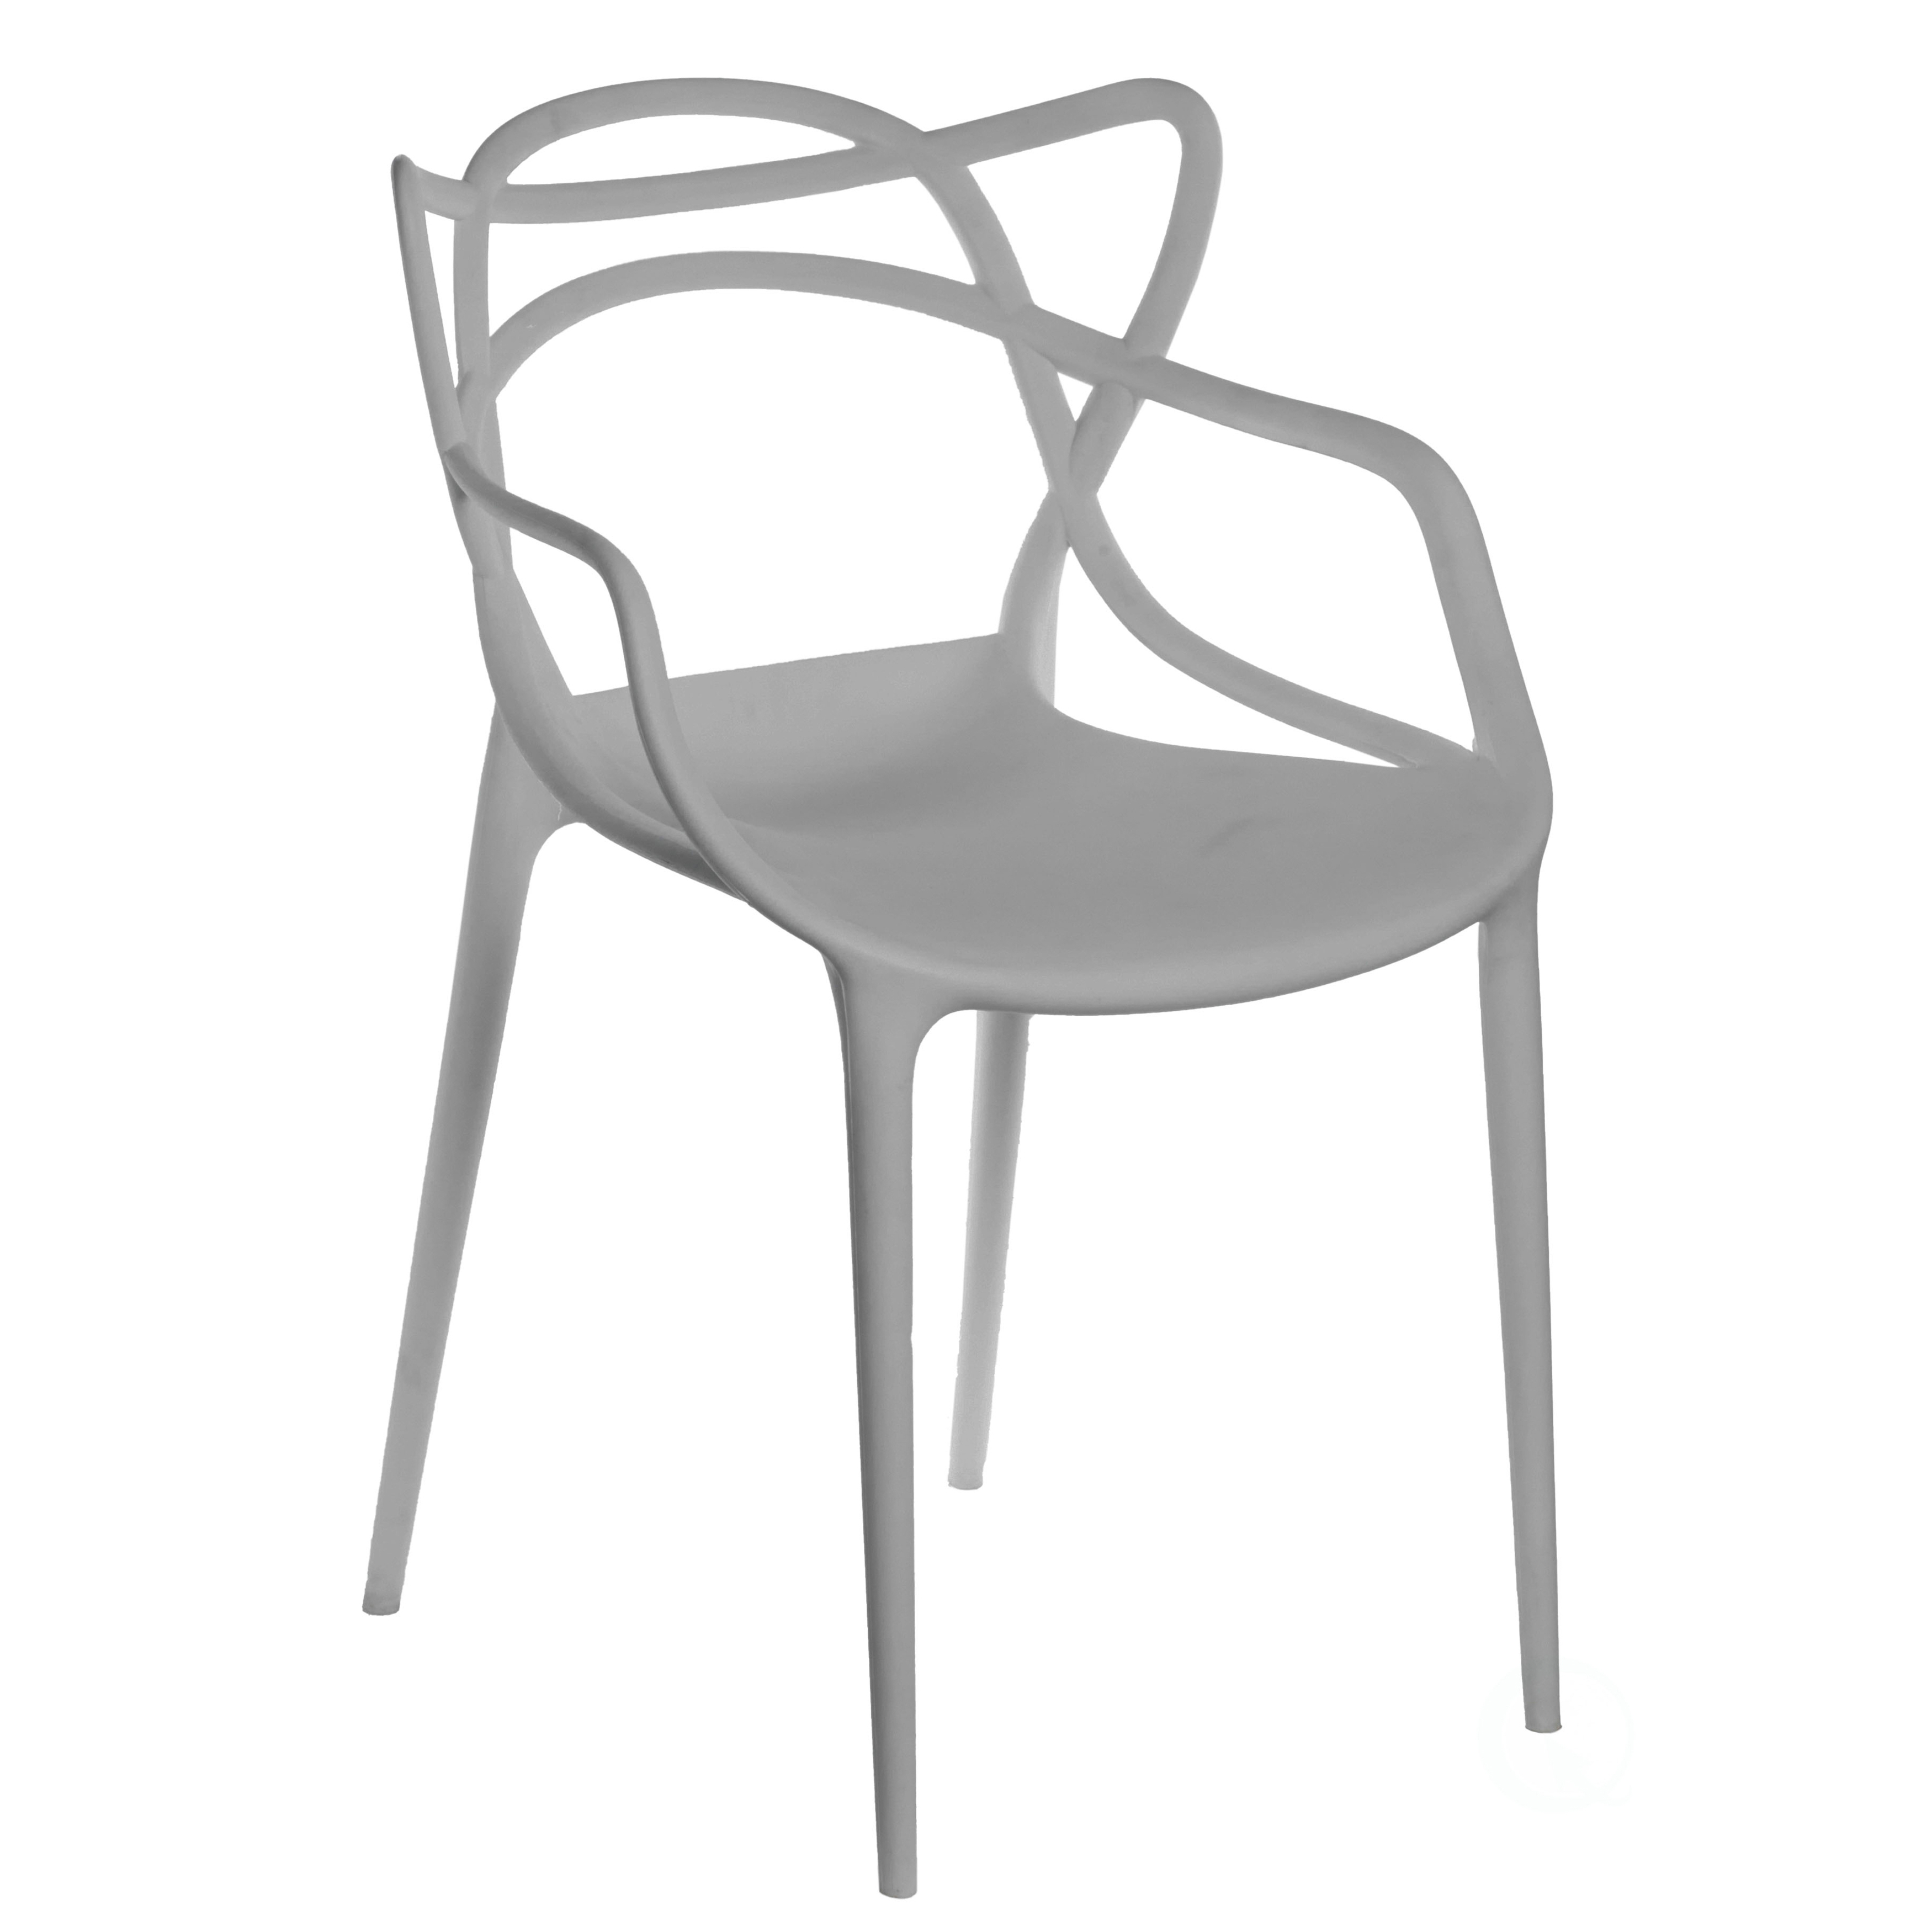 Mid-Century Modern Style Stackable Plastic Molded Arm Chair With Entangled Open Back - Gray Single